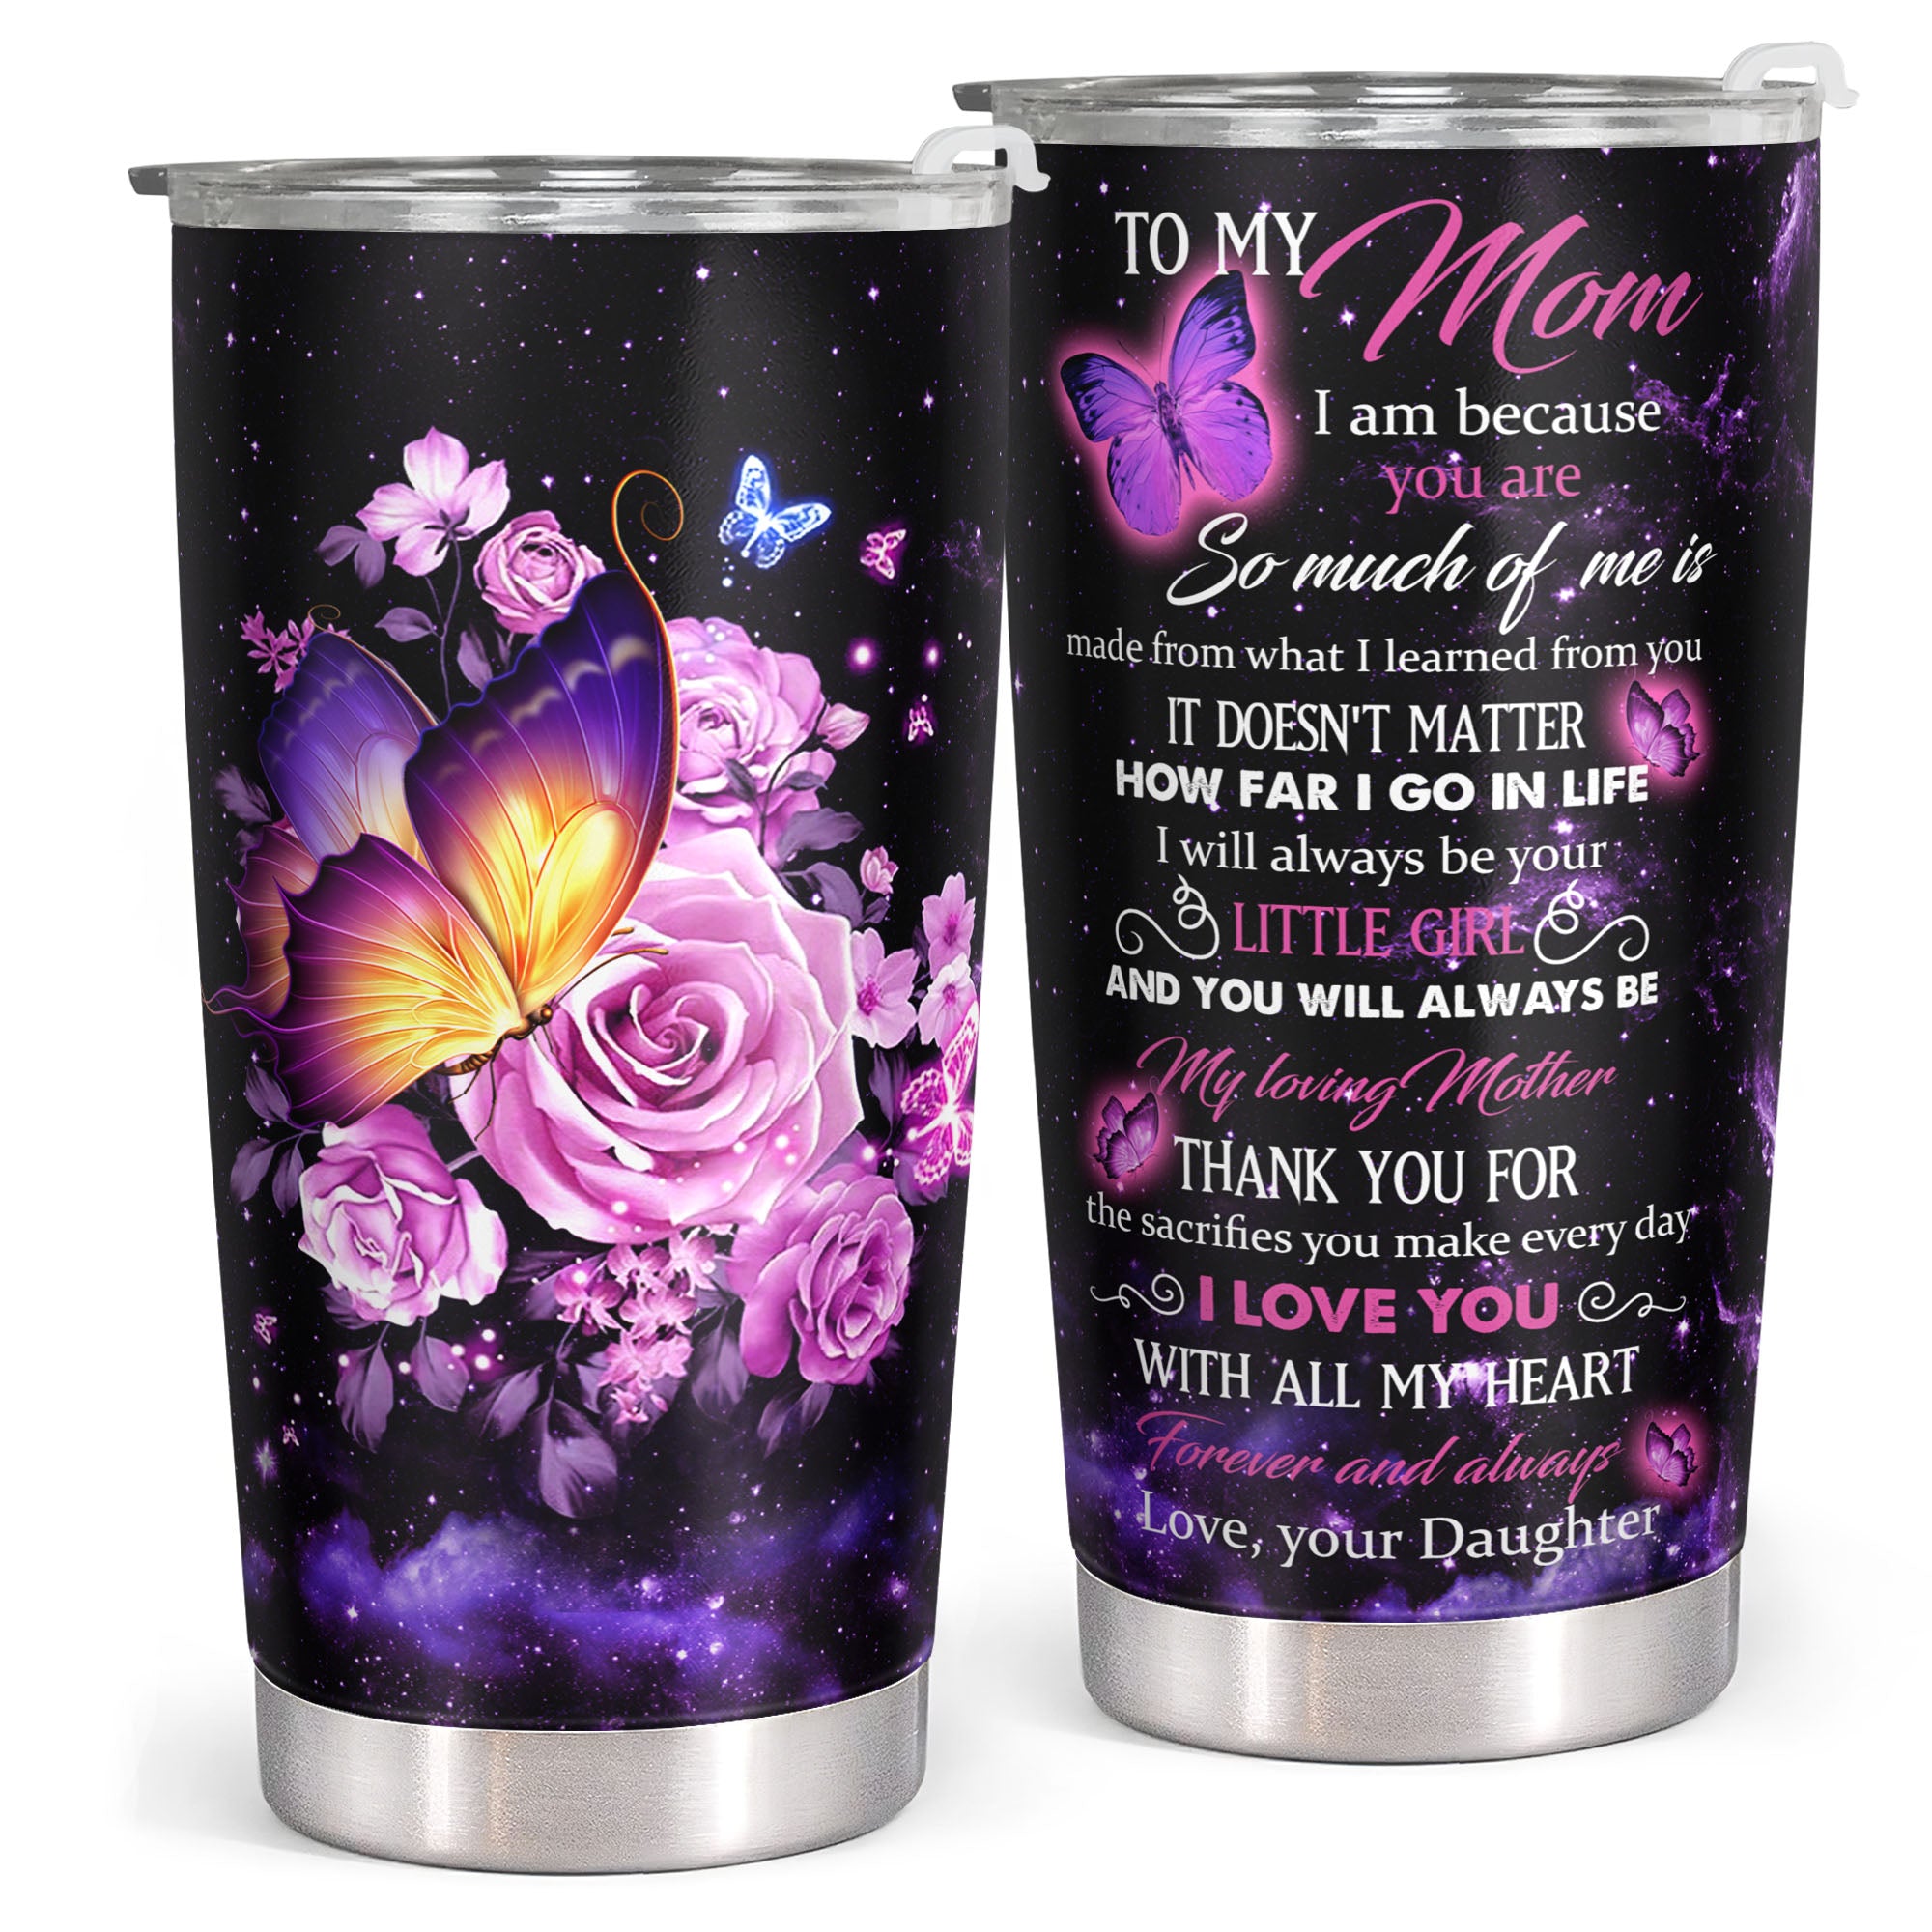  Lacrima Gifts for Mom from Daughter Son - Mom Birthday Gifts, Mom  Gifts, Birthday Gifts for Mom, Valentines Day Gifts for Mom, Christmas  Mothers Day Gifts, Presents for Mom, 7oz Lavender